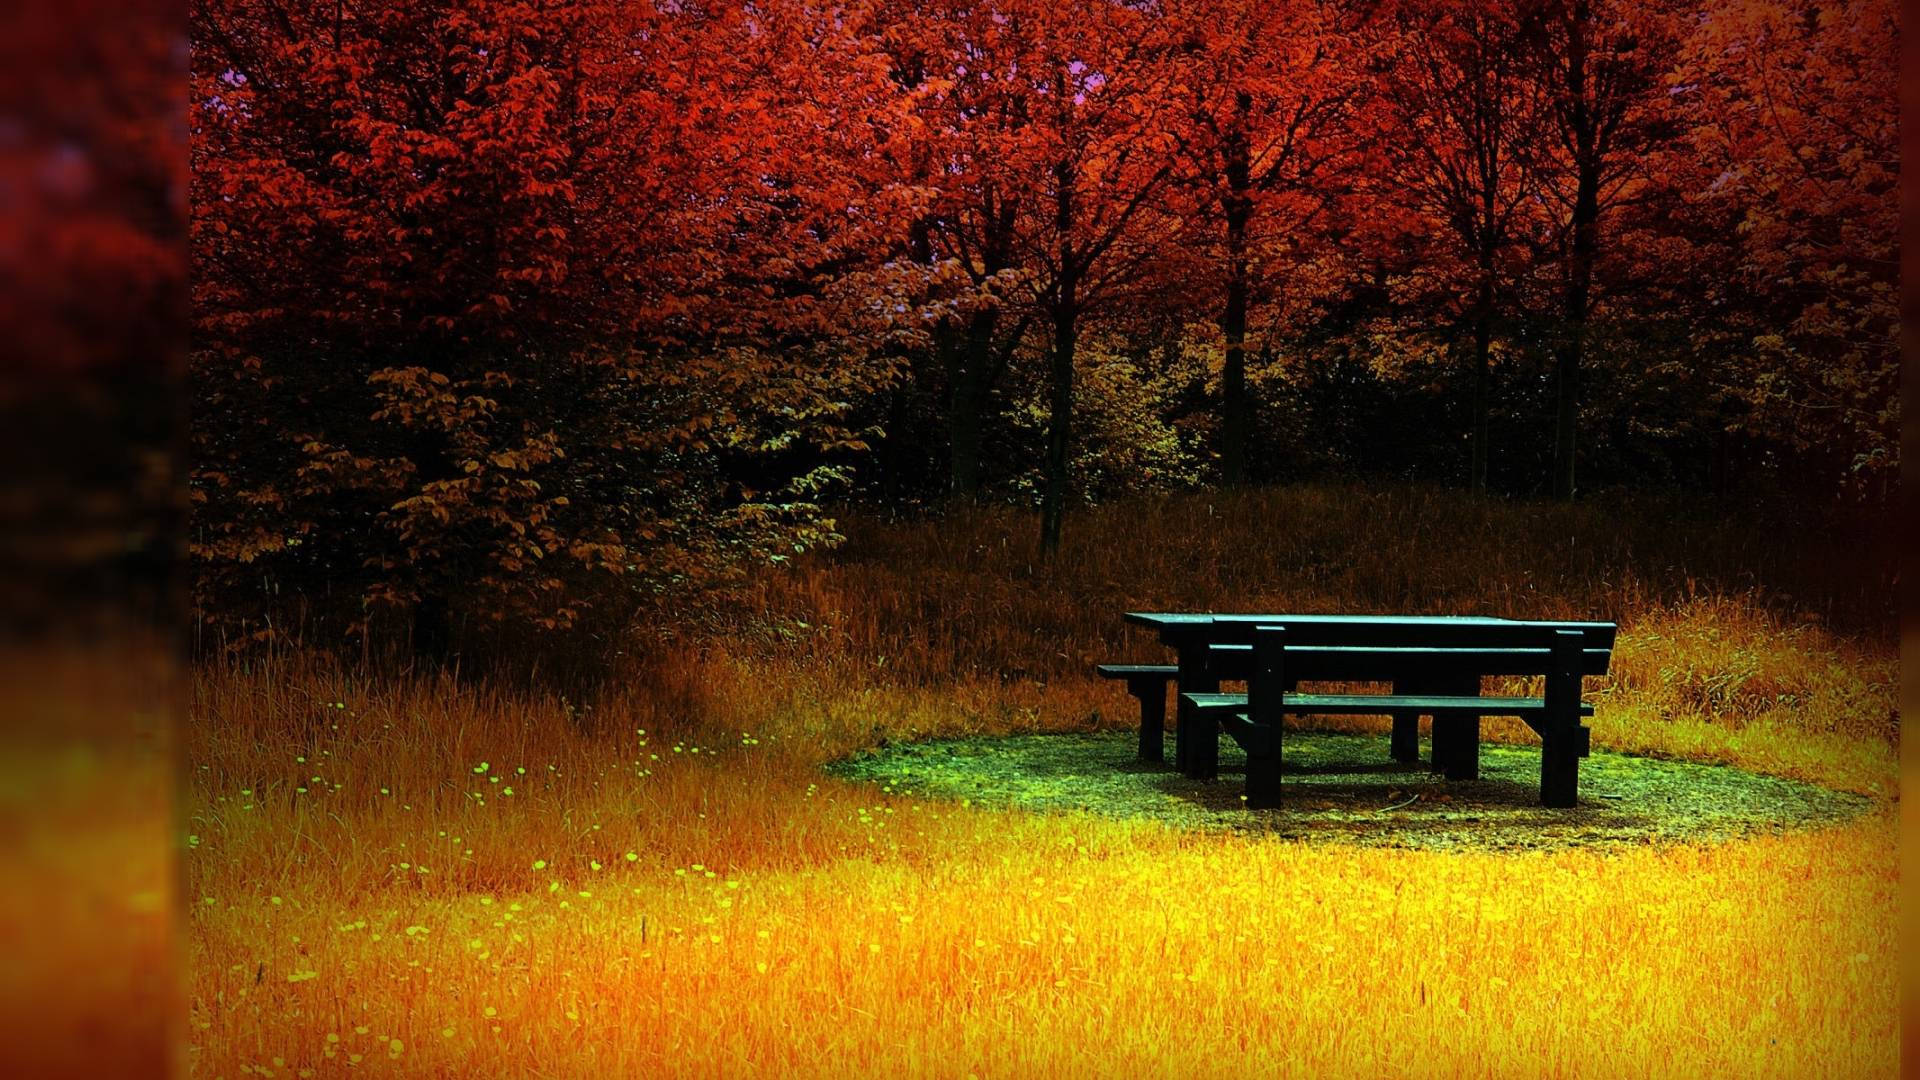 1920x1080 Full Hd Picnic Table In Autumn Background